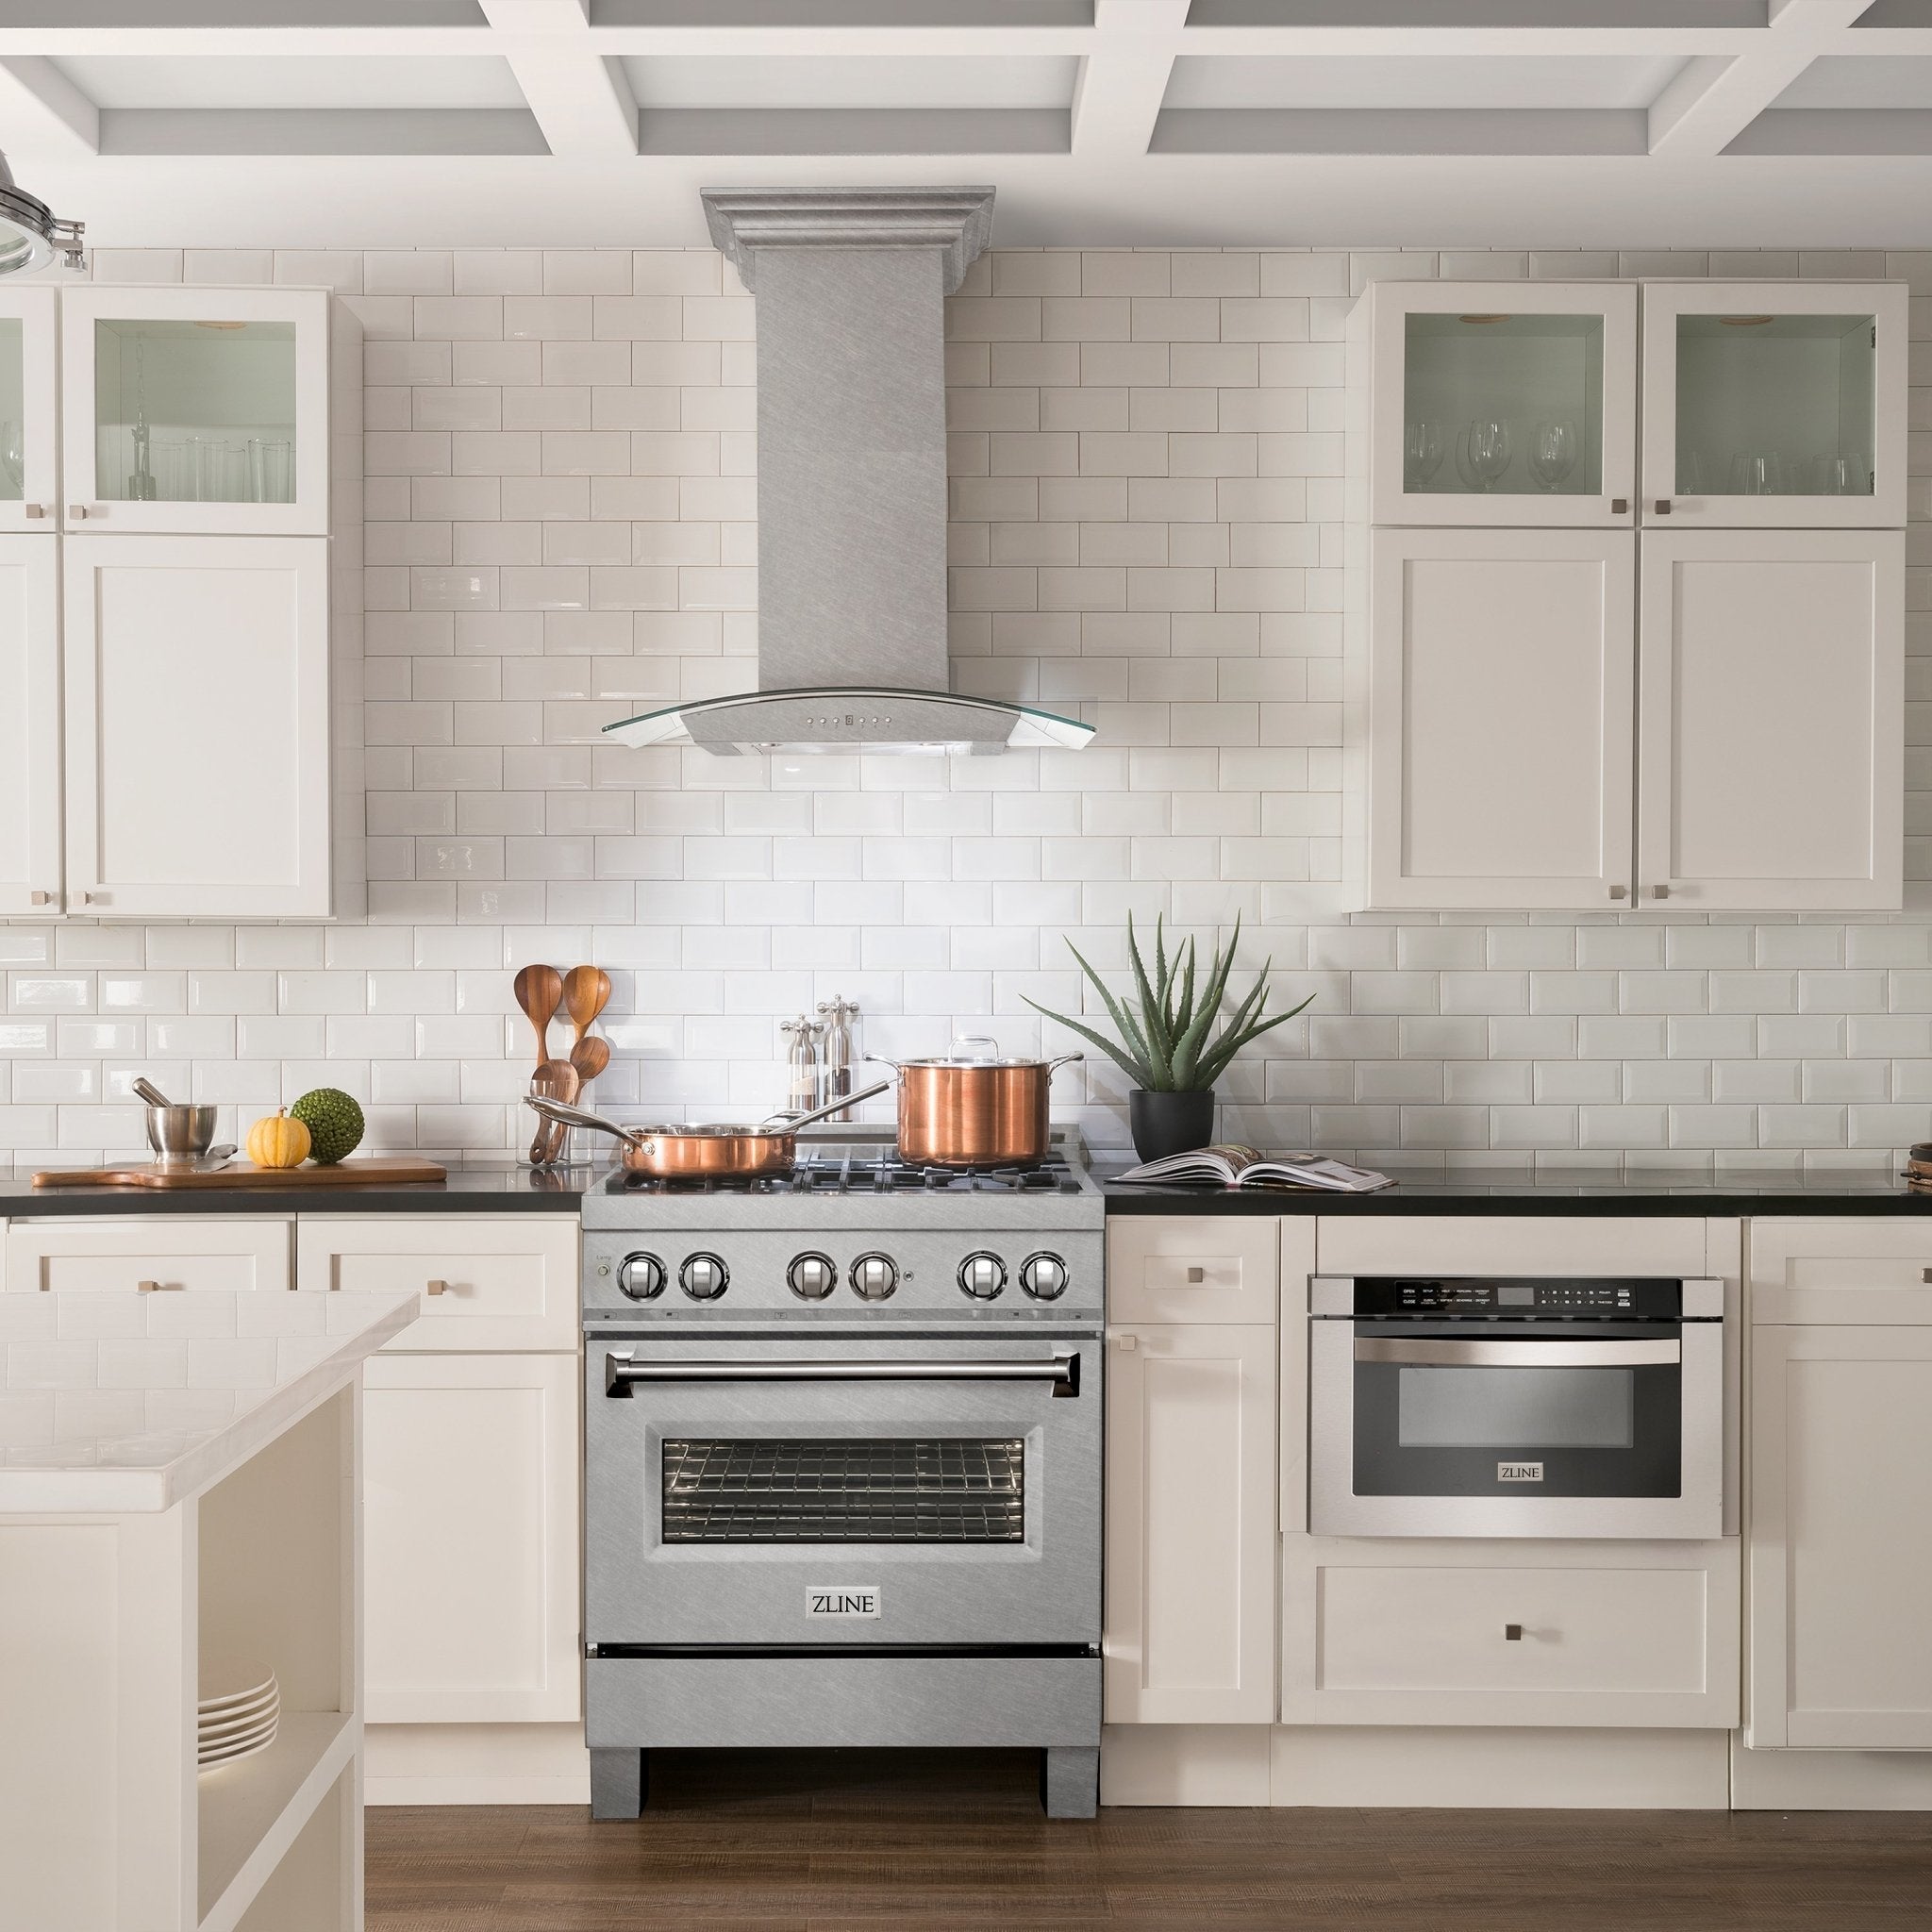 ZLINE Ducted Wall Mount Range Hood in Fingerprint Resistant DuraSnow Stainless Steel & Glass (8KN4S) in a cottage-style kitchen with white cabinets and walls.